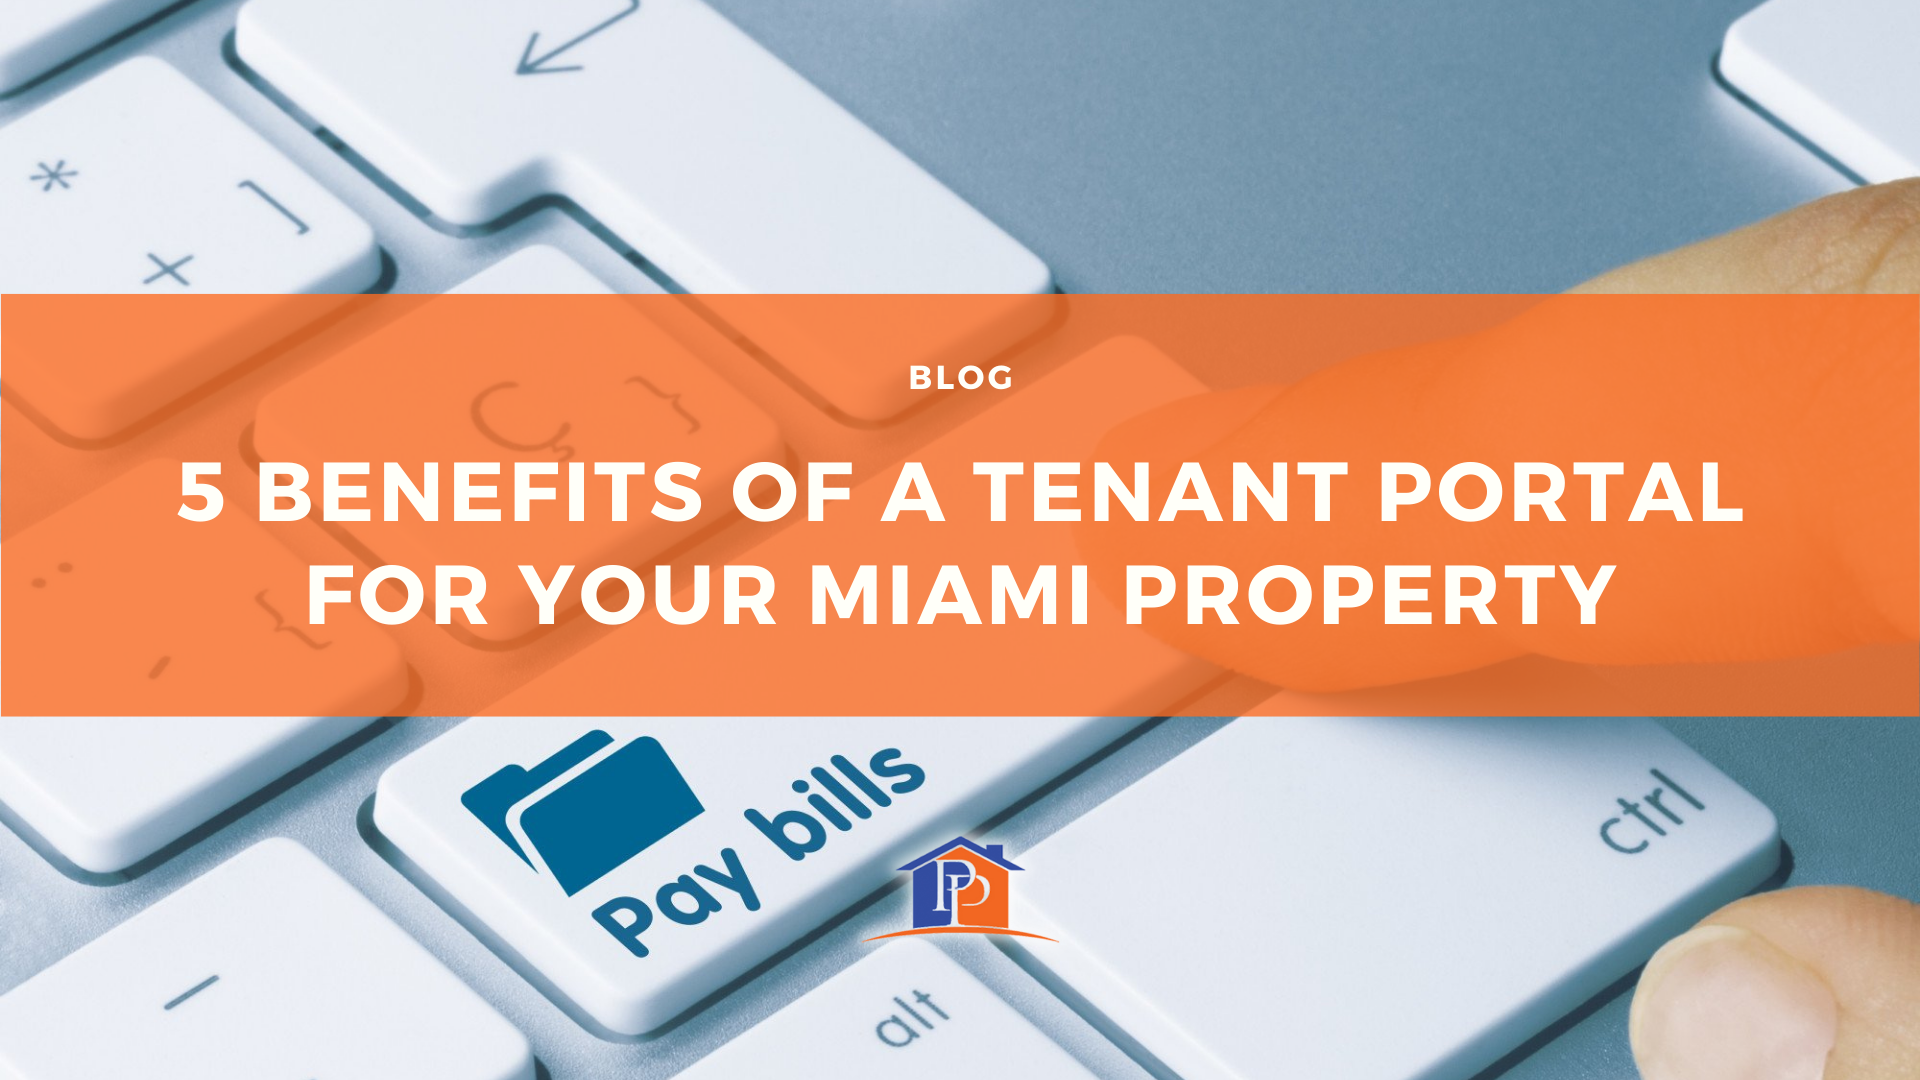 5 Benefits of a Tenant Portal for Your Miami Property